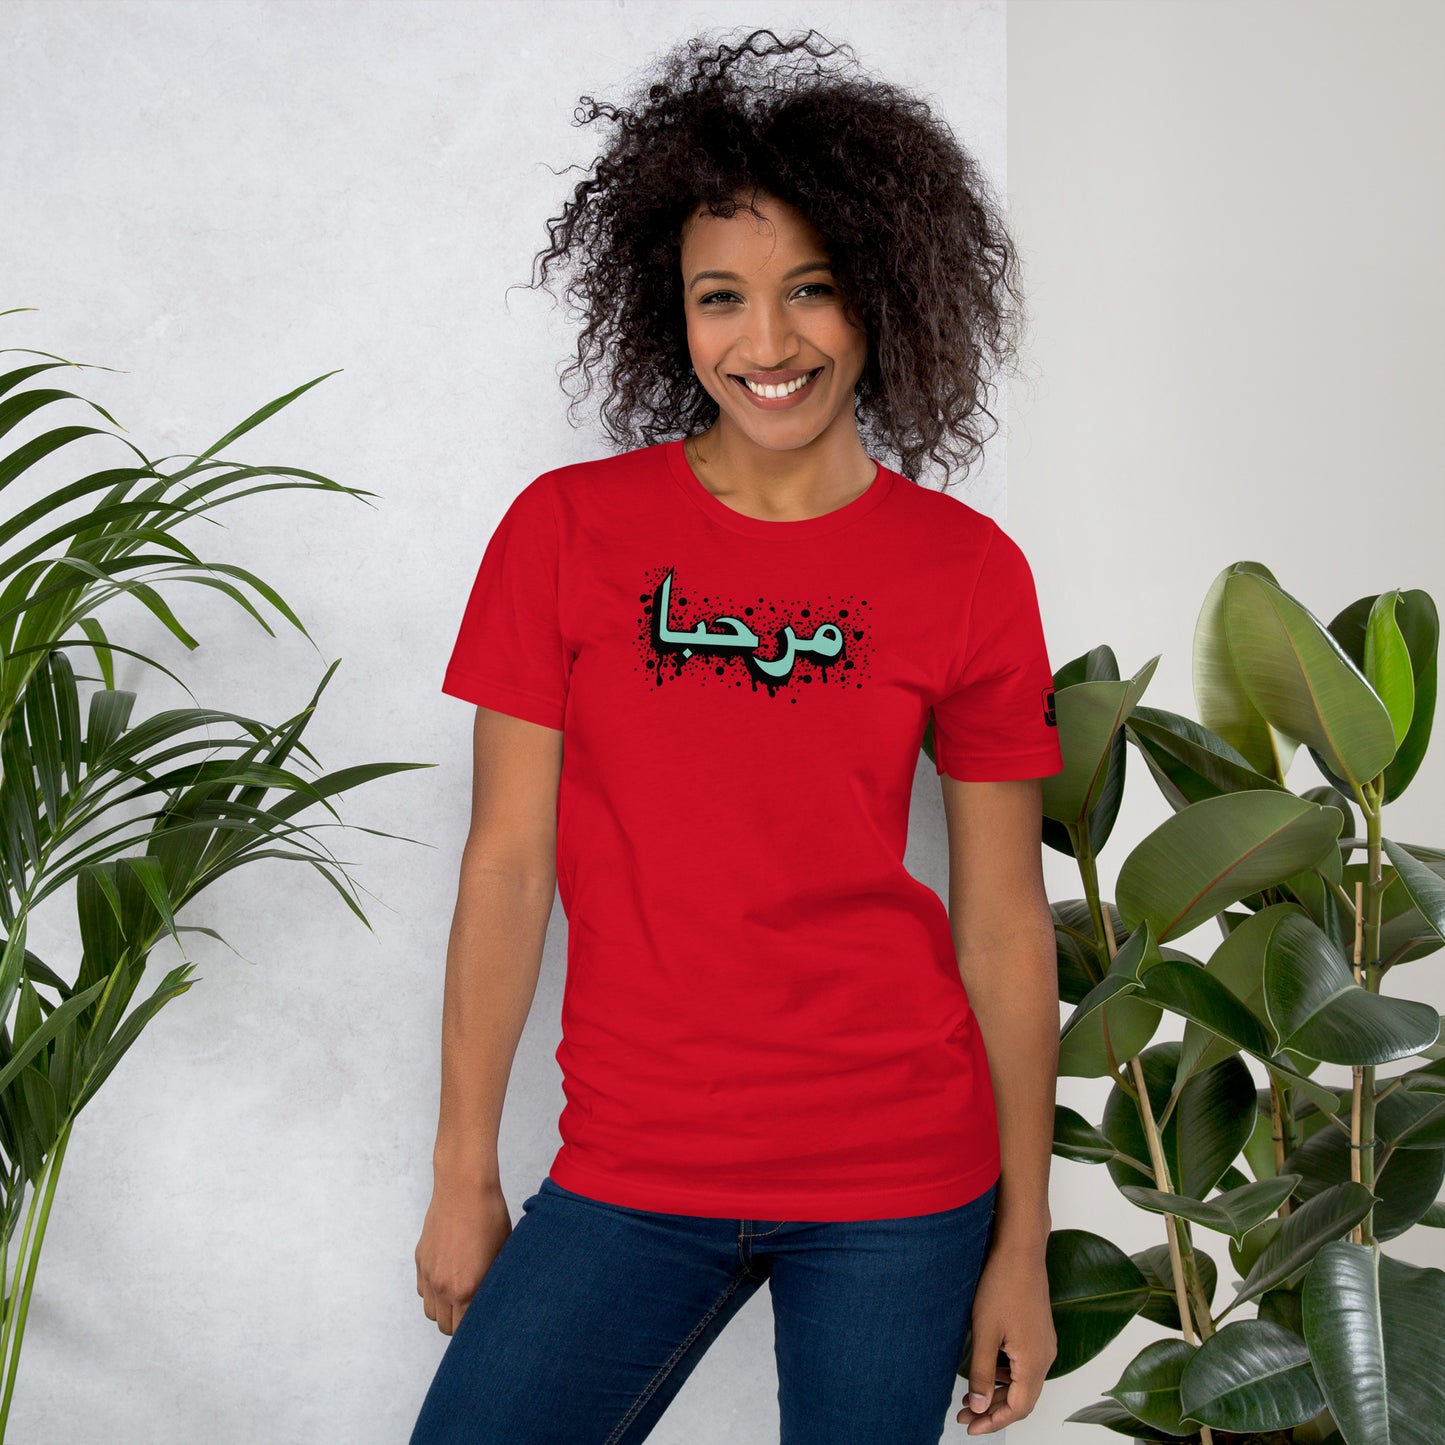 Smiling woman with curly hair wearing a red t-shirt featuring a central turquoise Arabic calligraphy design with black accents, a logo patch on the sleeve, styled with blue jeans, standing in an indoor setting with green plants in the background.